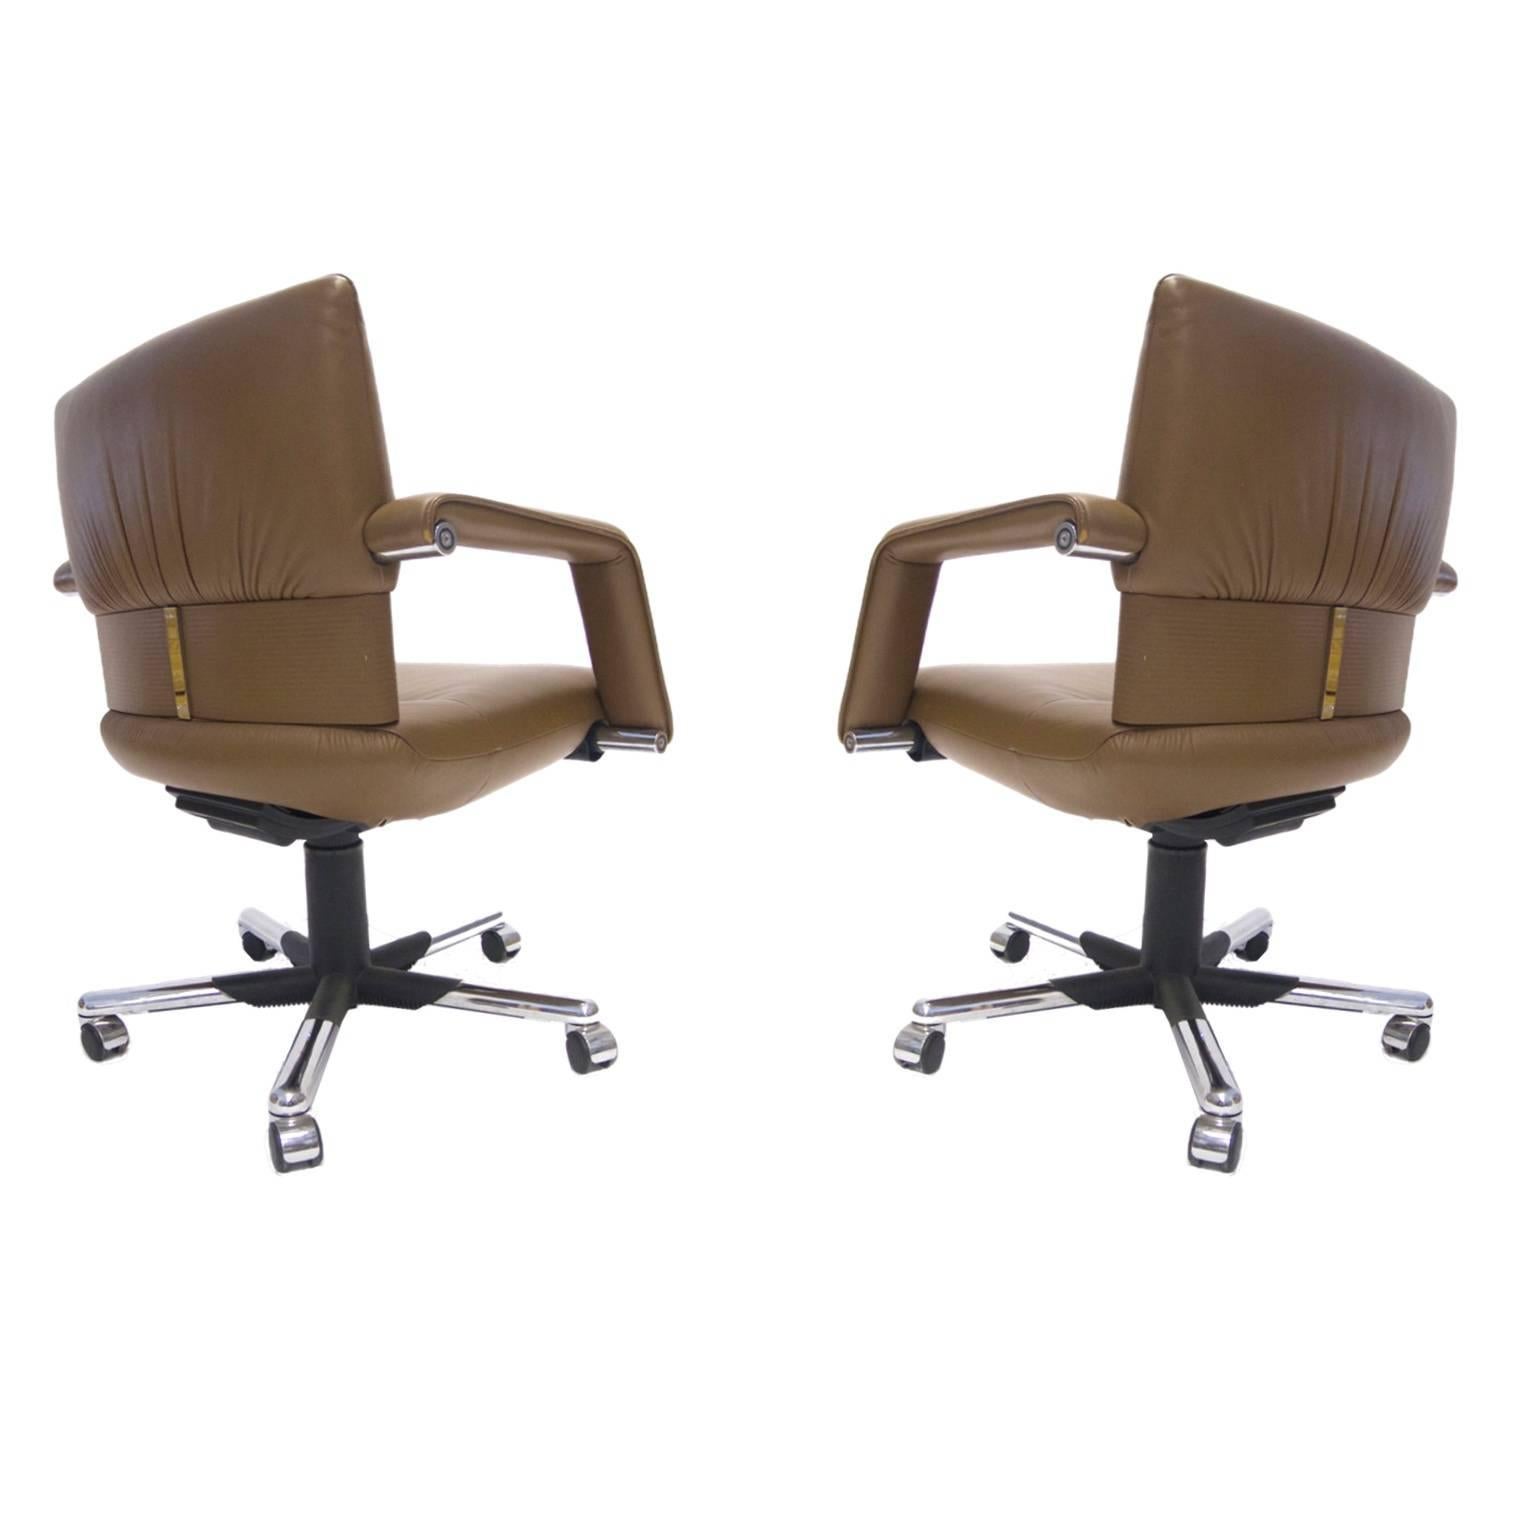 Mario Bellini extra wide swivel and reclining executive chairs on casters. Made in high quality leather by Vitra. Priced per chair, two available.
 